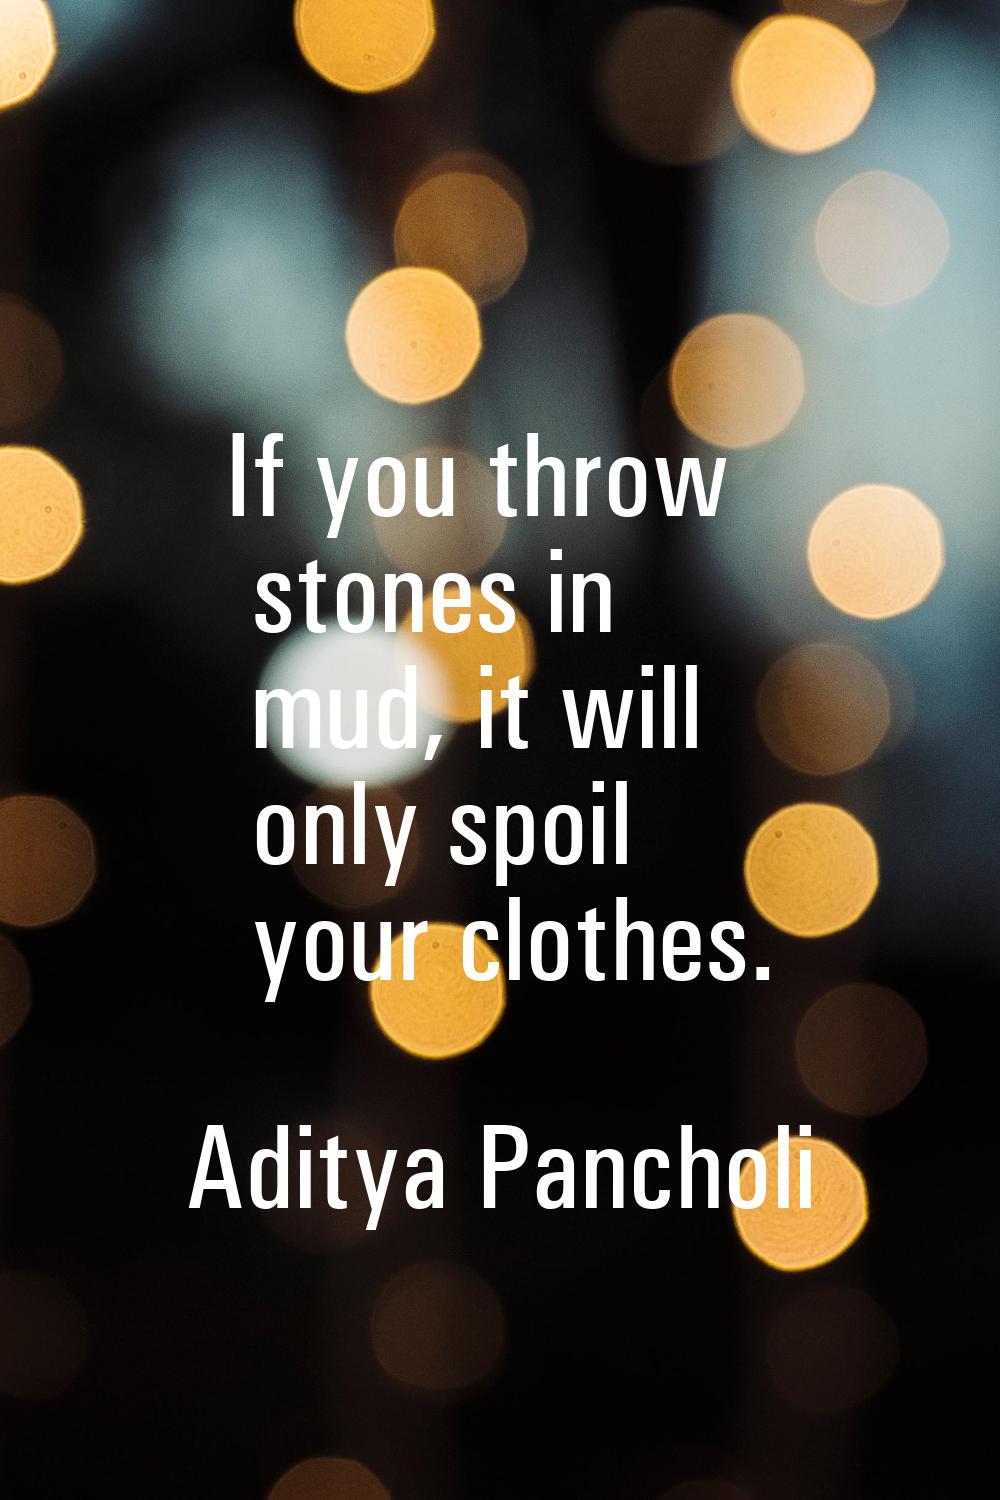 If you throw stones in mud, it will only spoil your clothes.